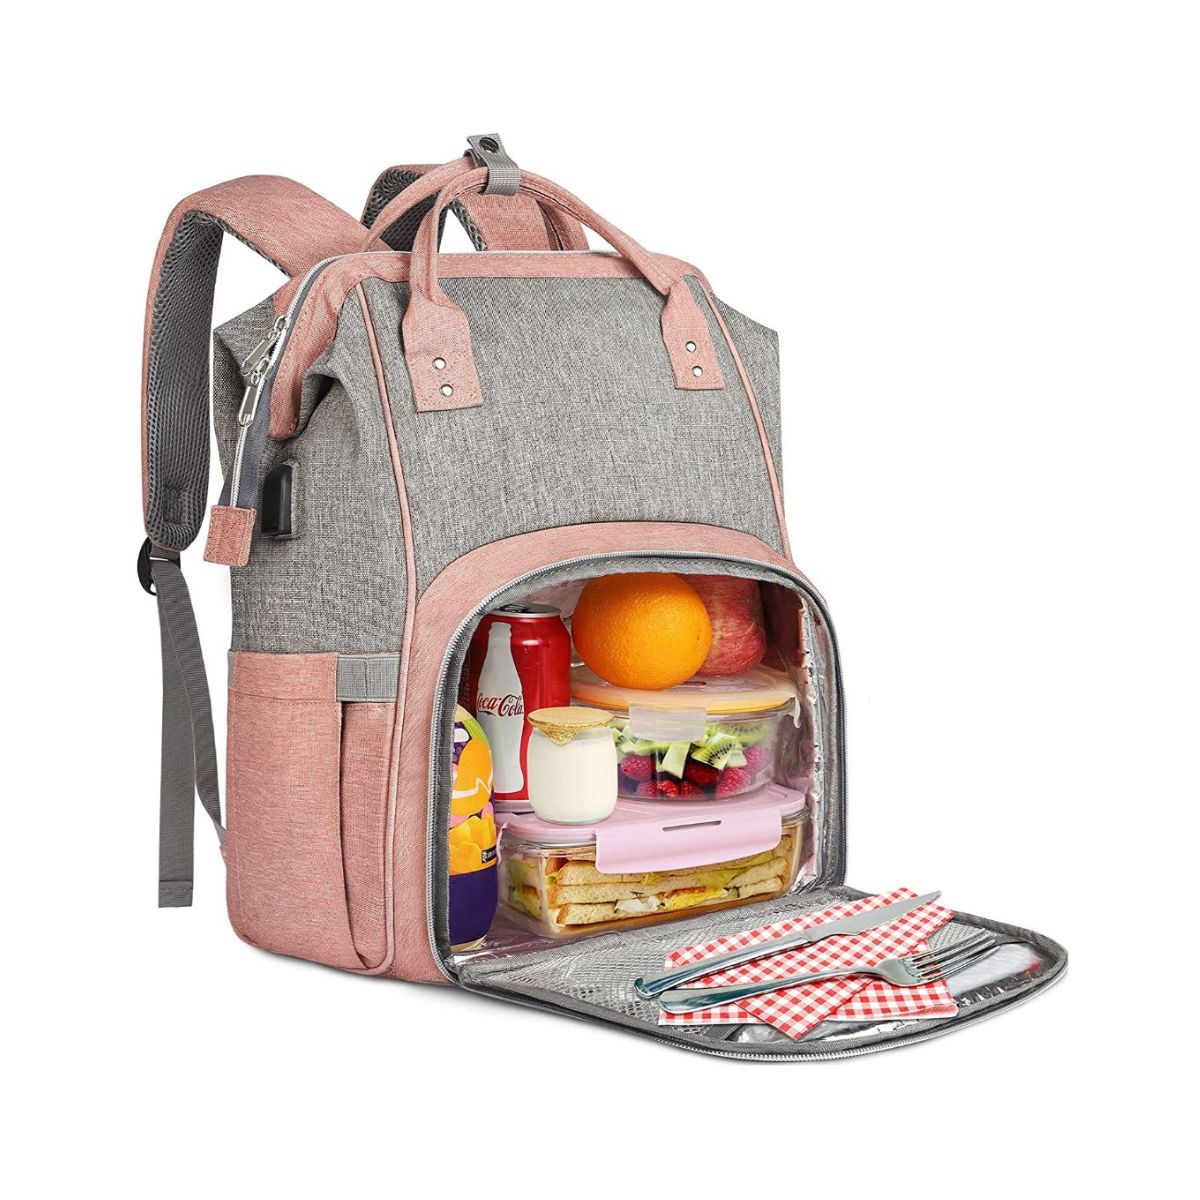 Grey backpack lunch box with pink trim.